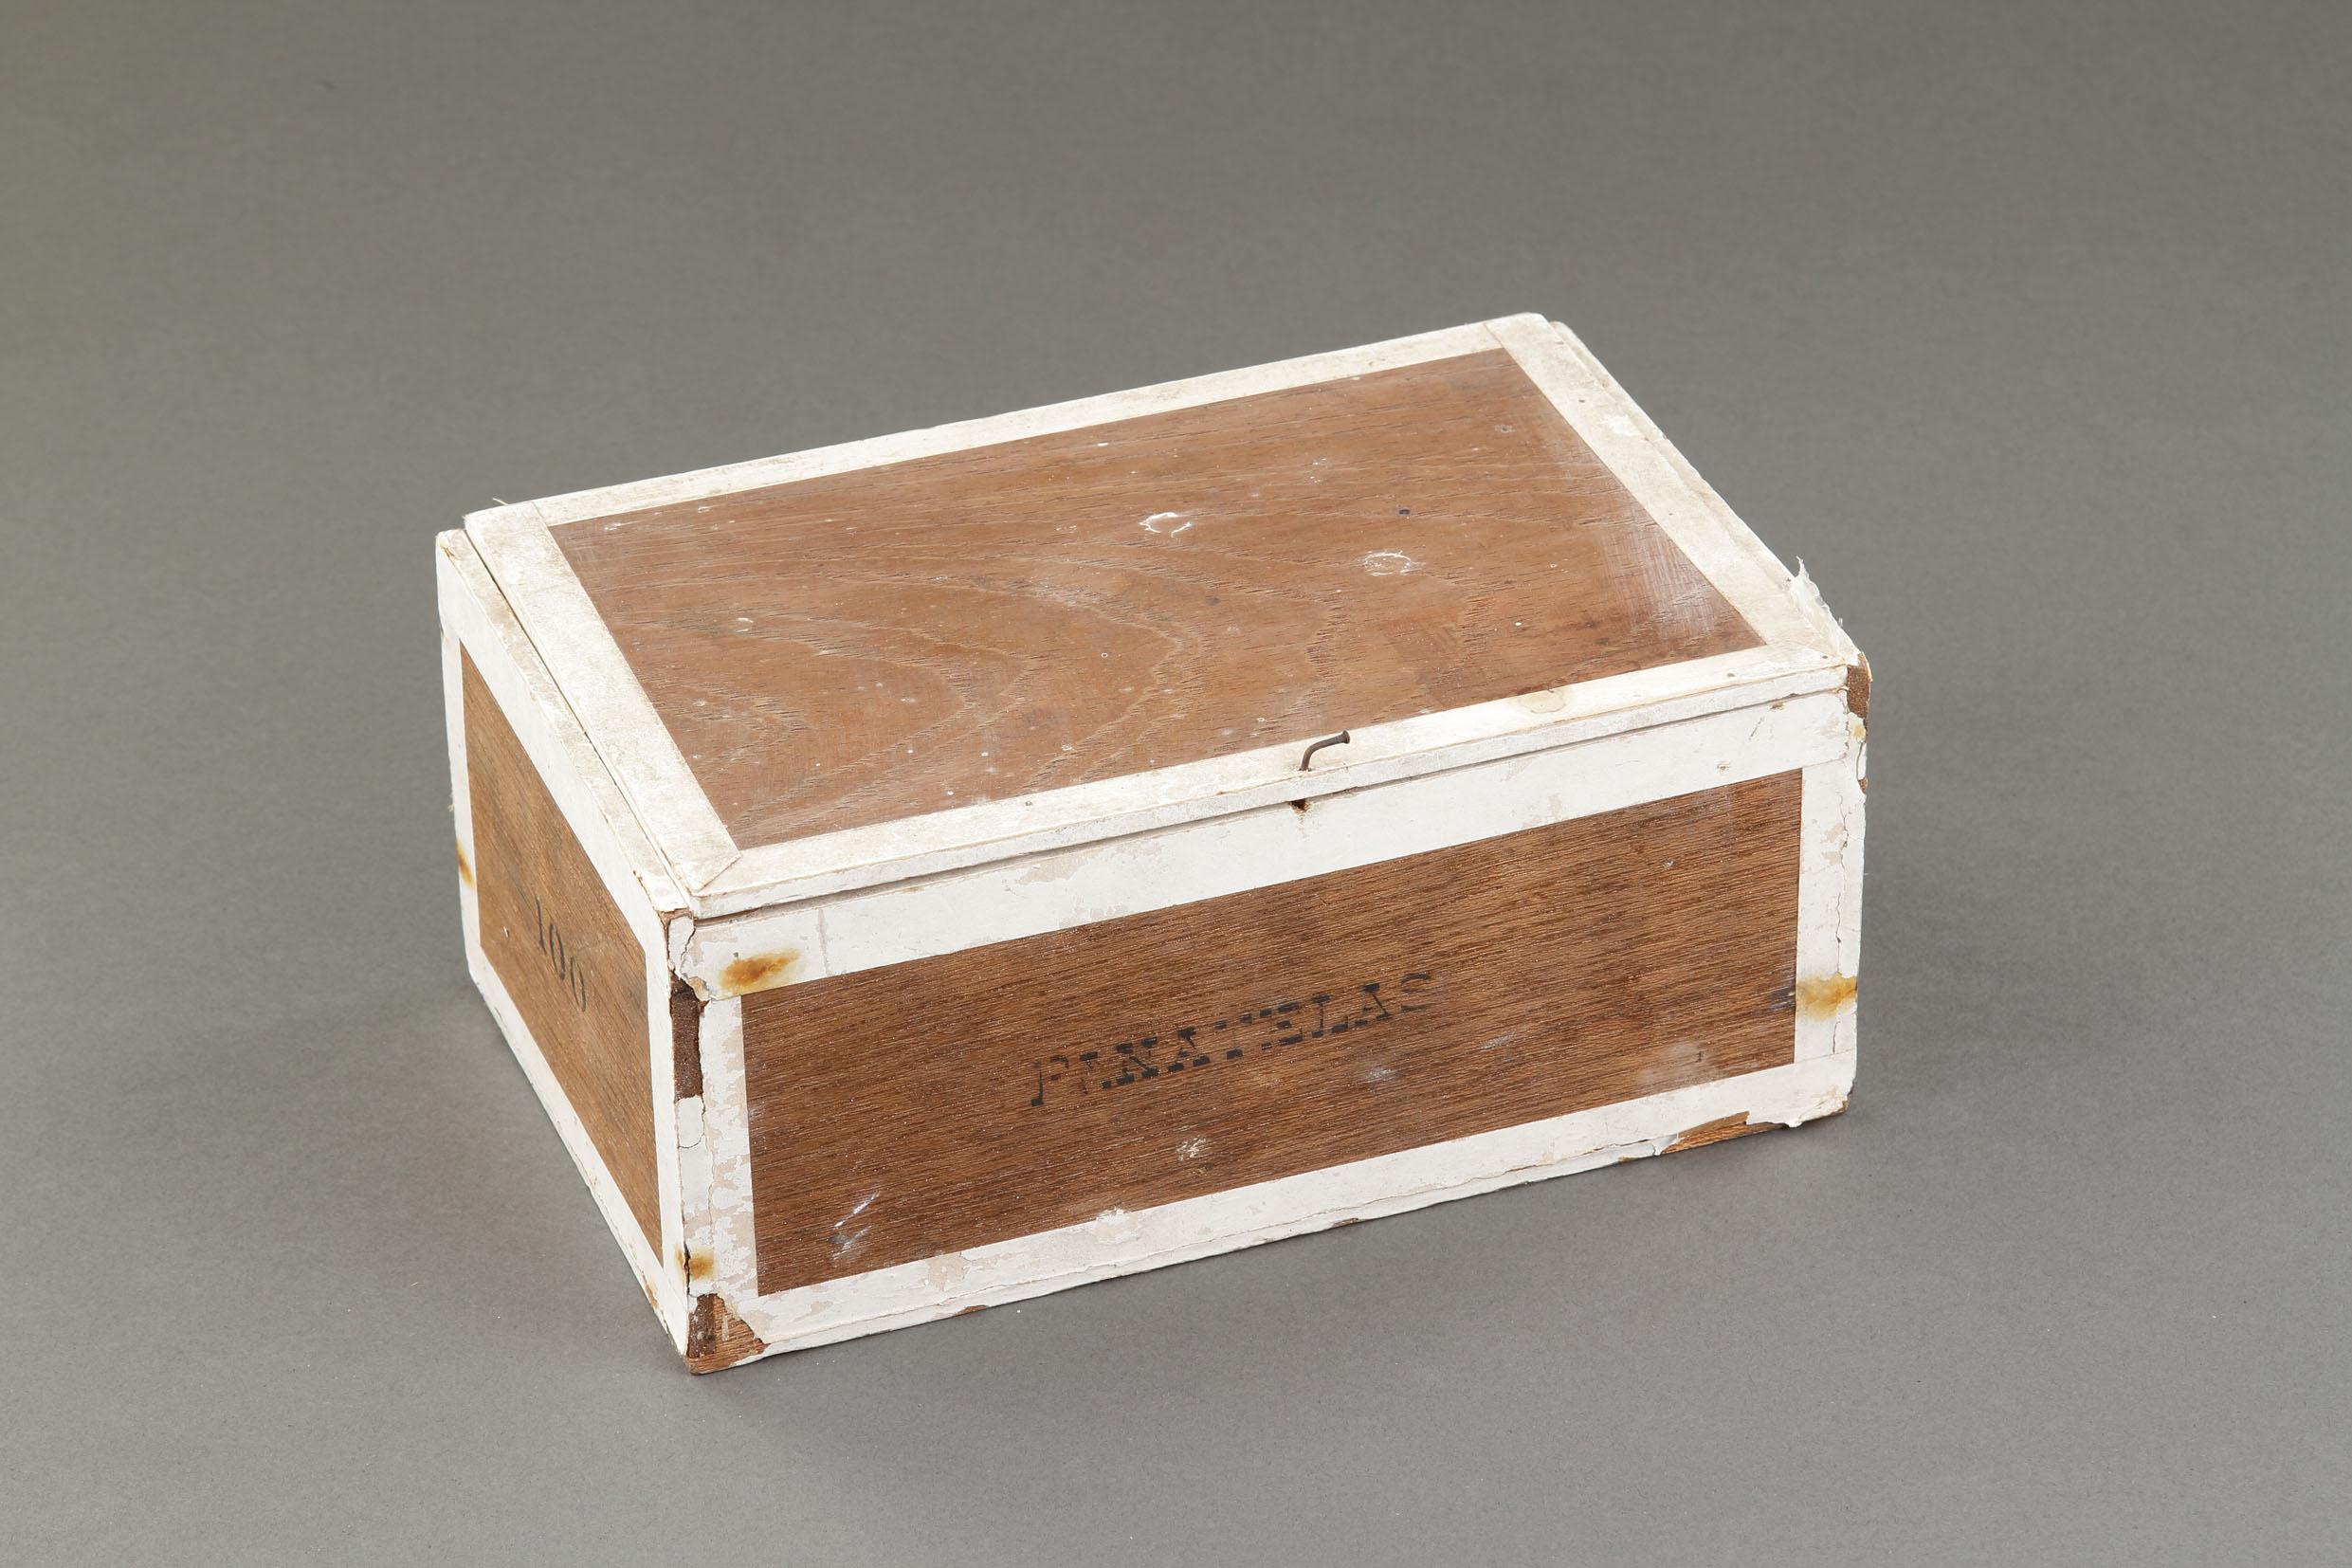 Antarctican A Rare ‘Adelie’ Penguin Egg from the Australian 1911-14 Expedition For Sale